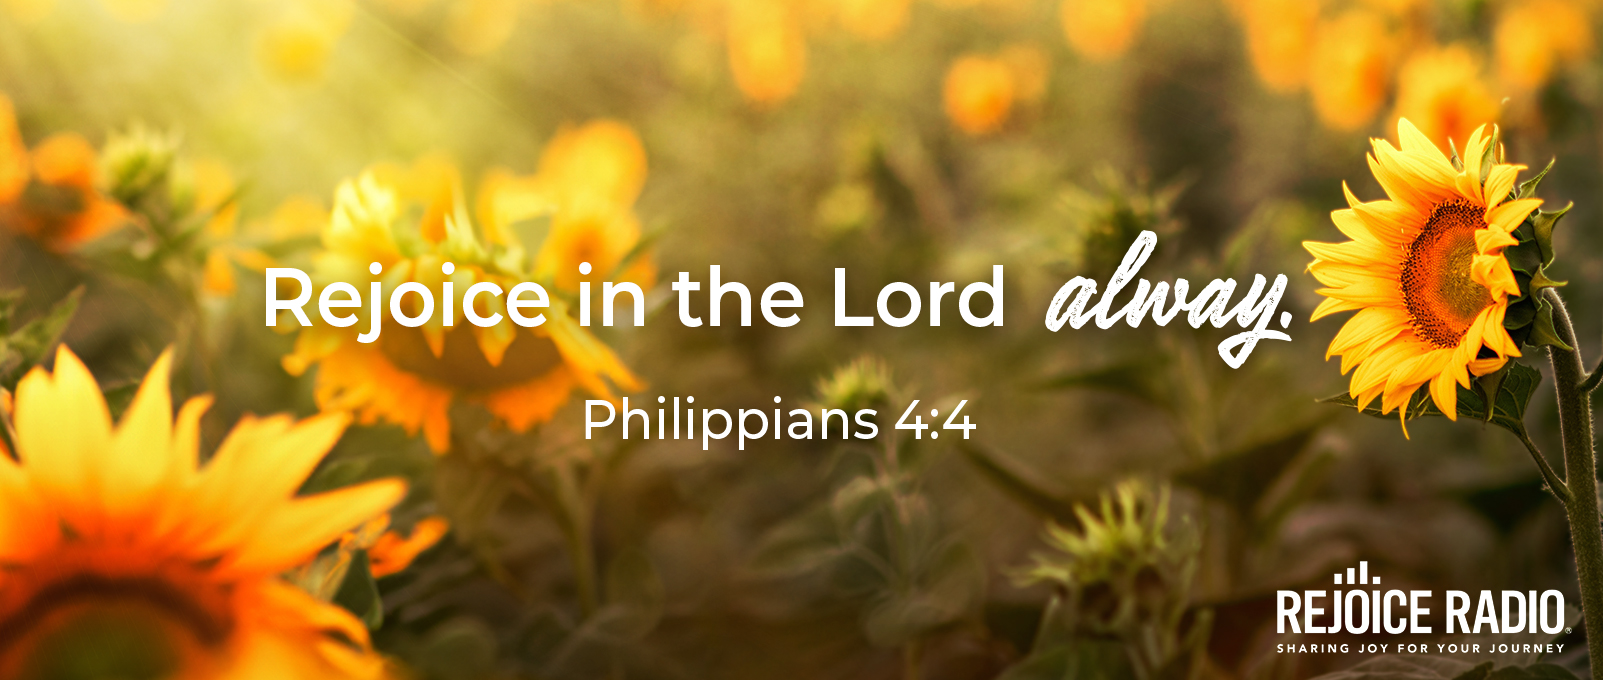 Philippians 4:4 - Rejoice in the Lord alway.